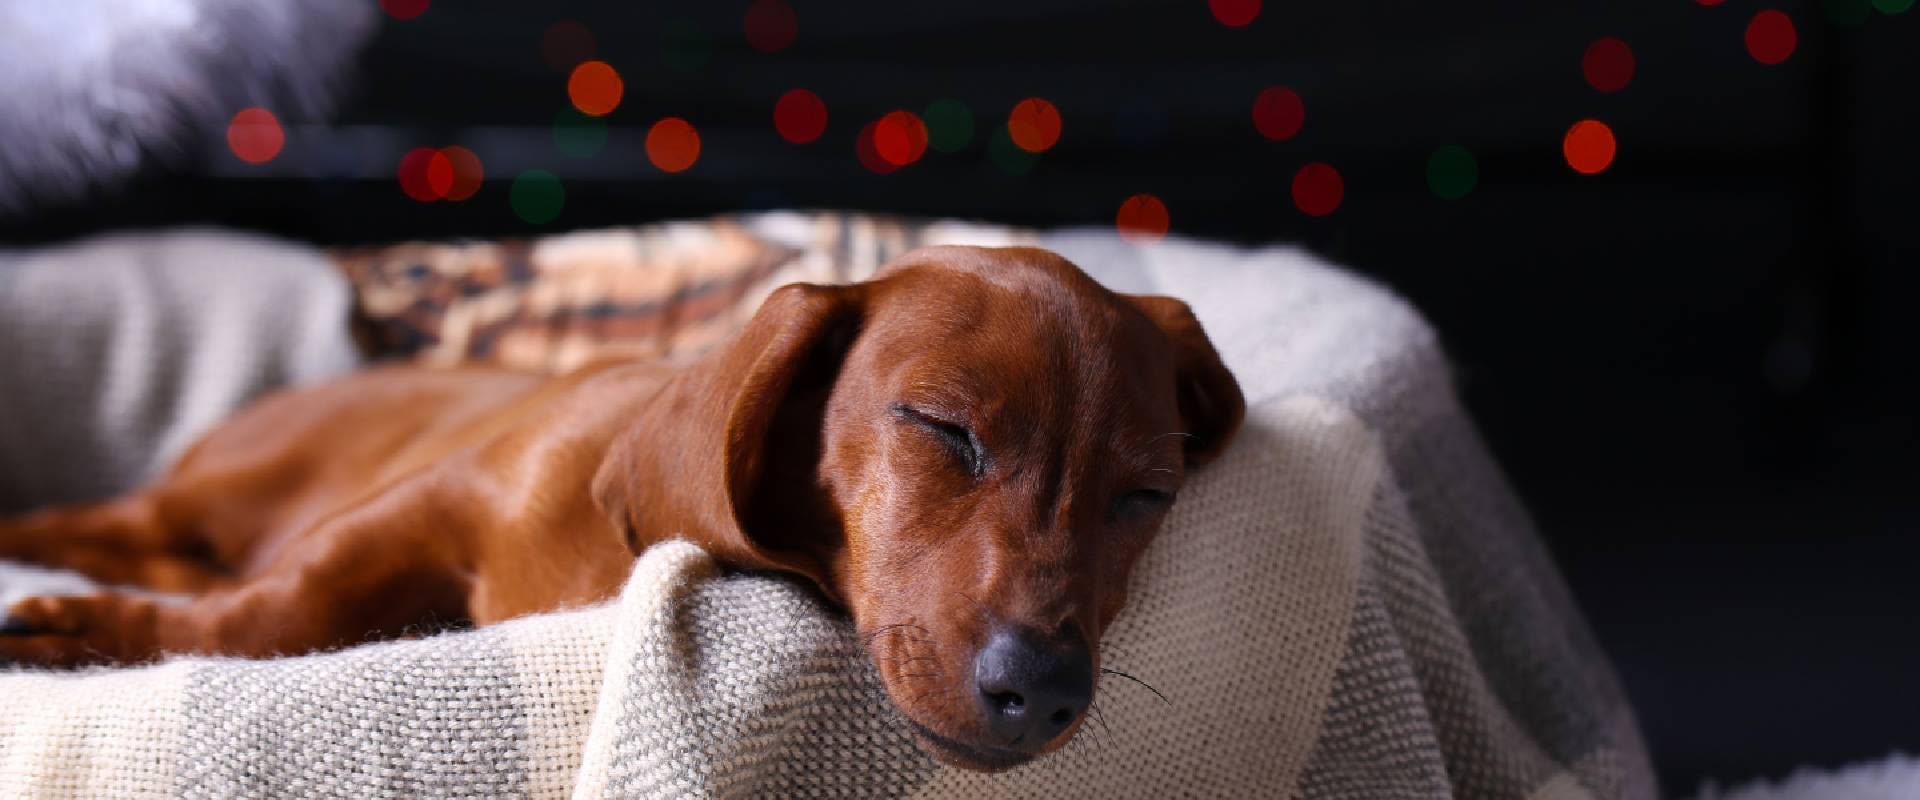 Sausage dog sleeping in front of a festive background